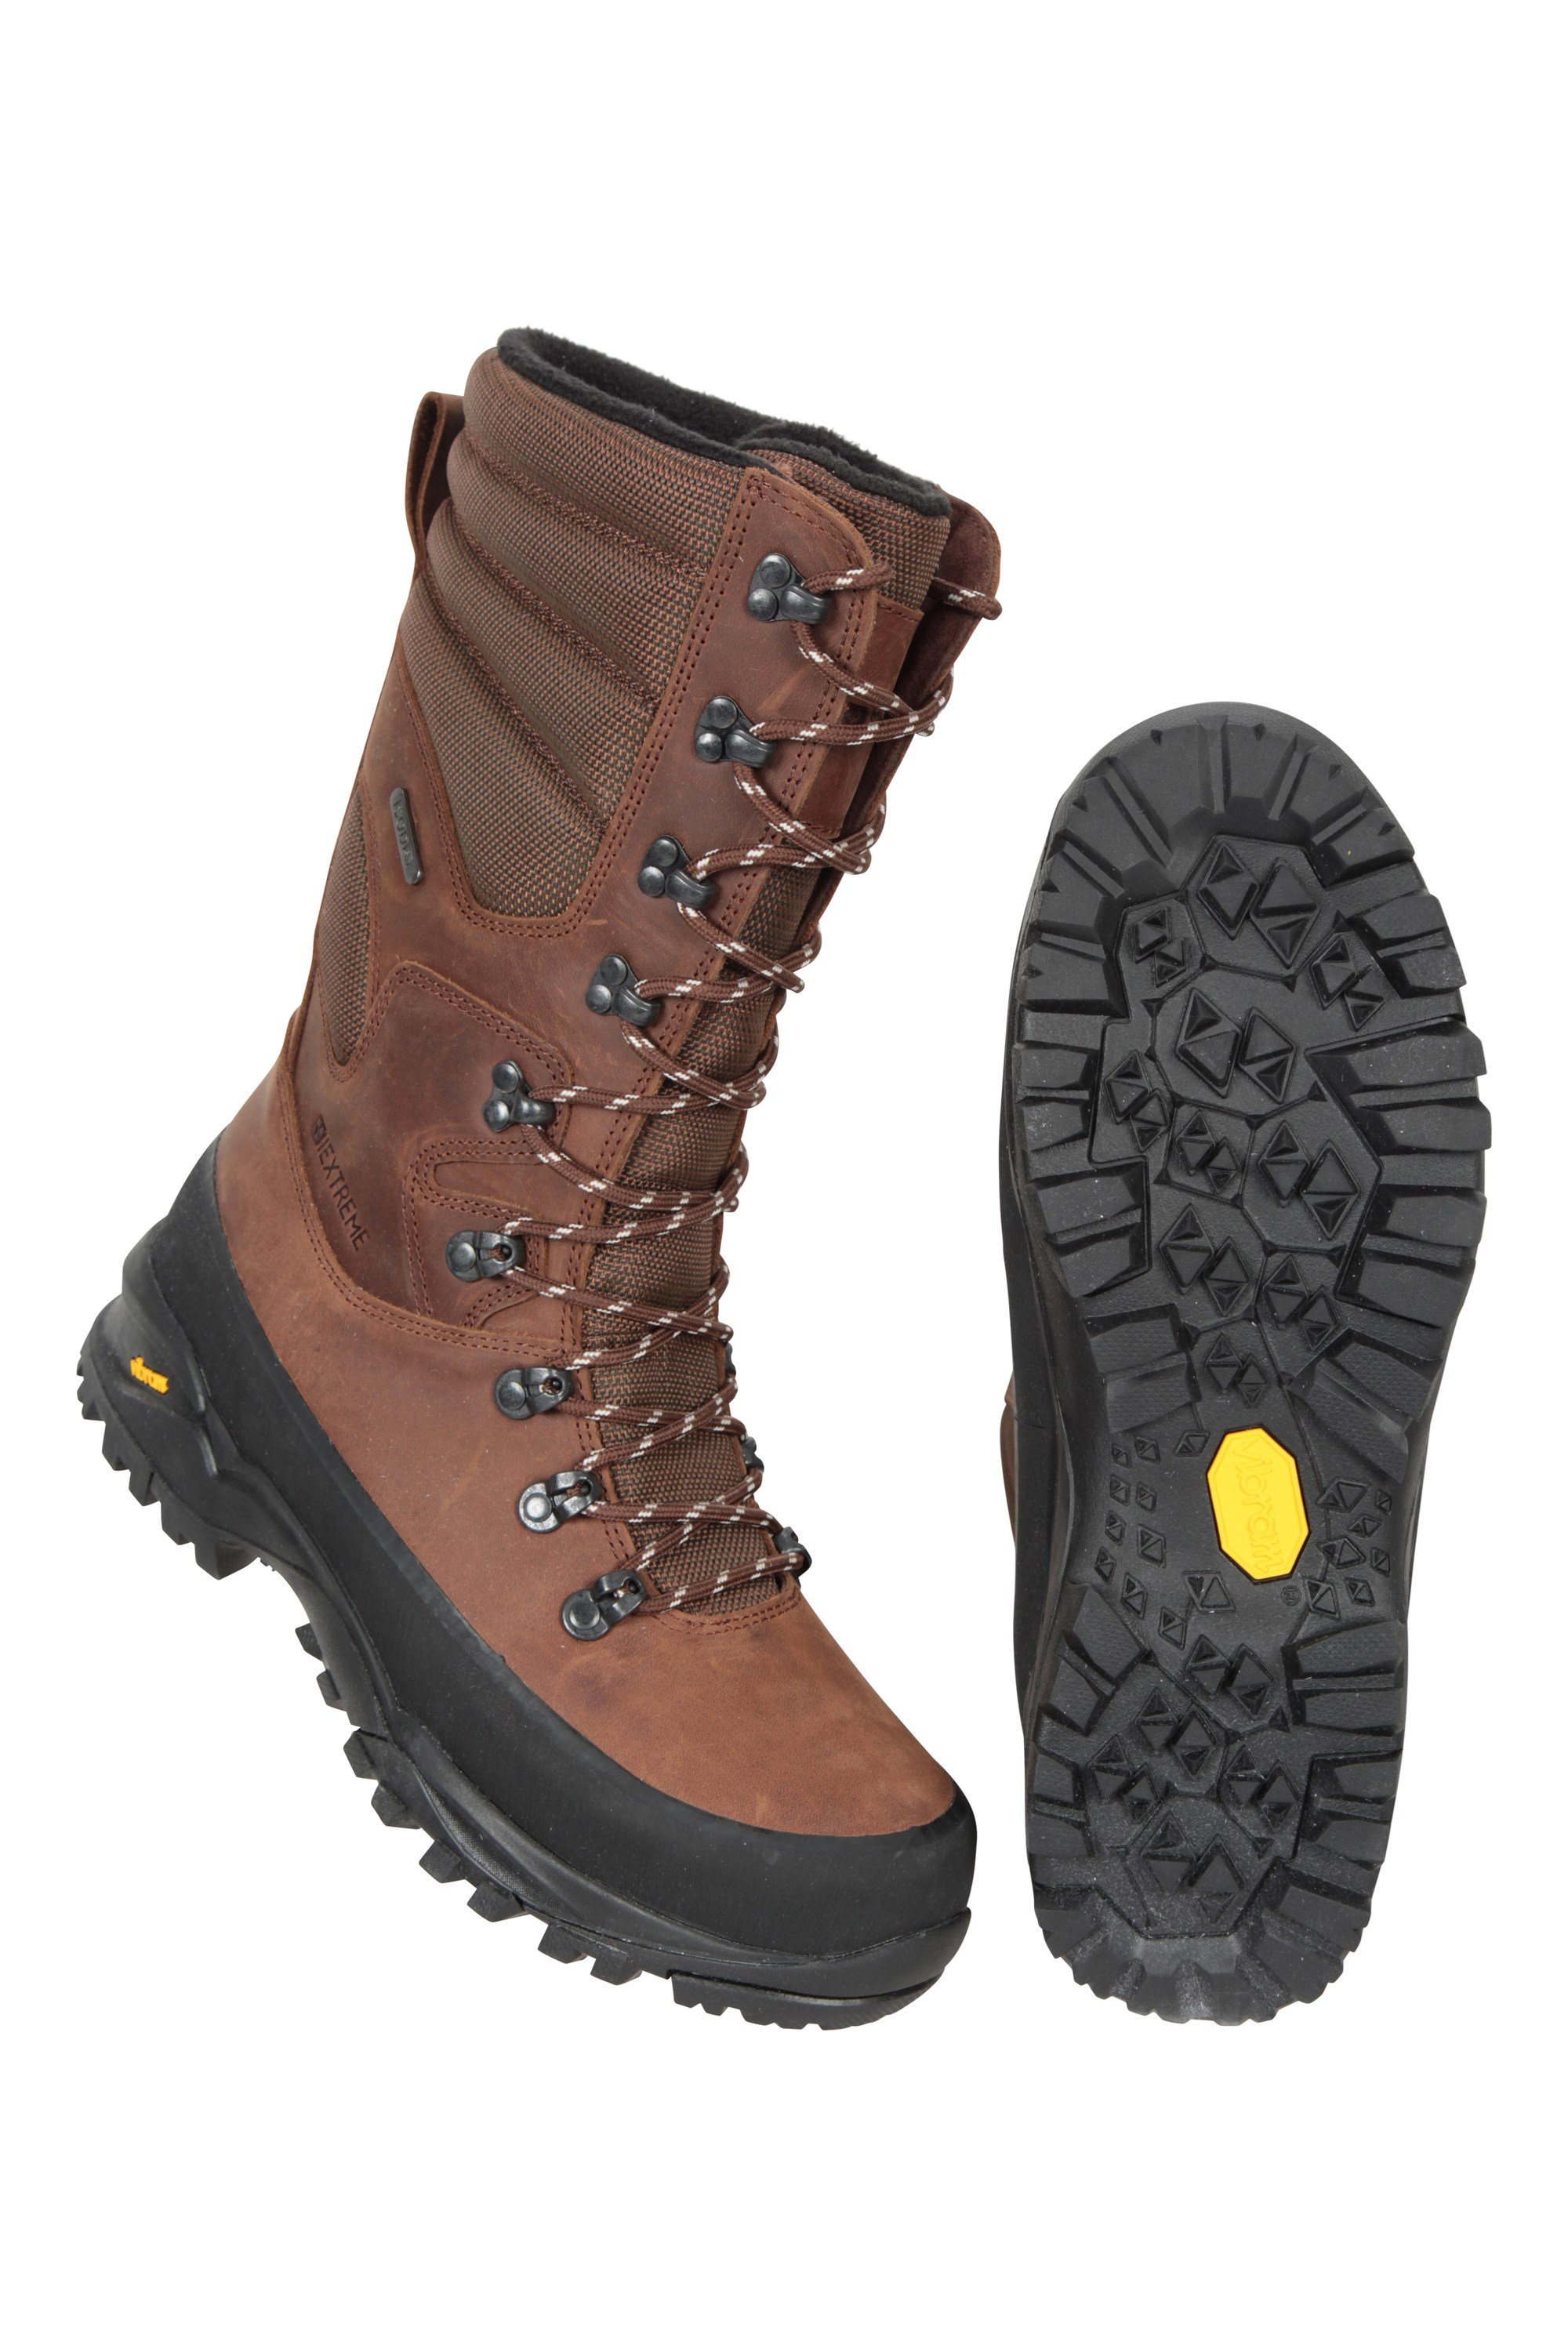 Expedition Extreme Mens Vibram Waterproof Boots - Brown